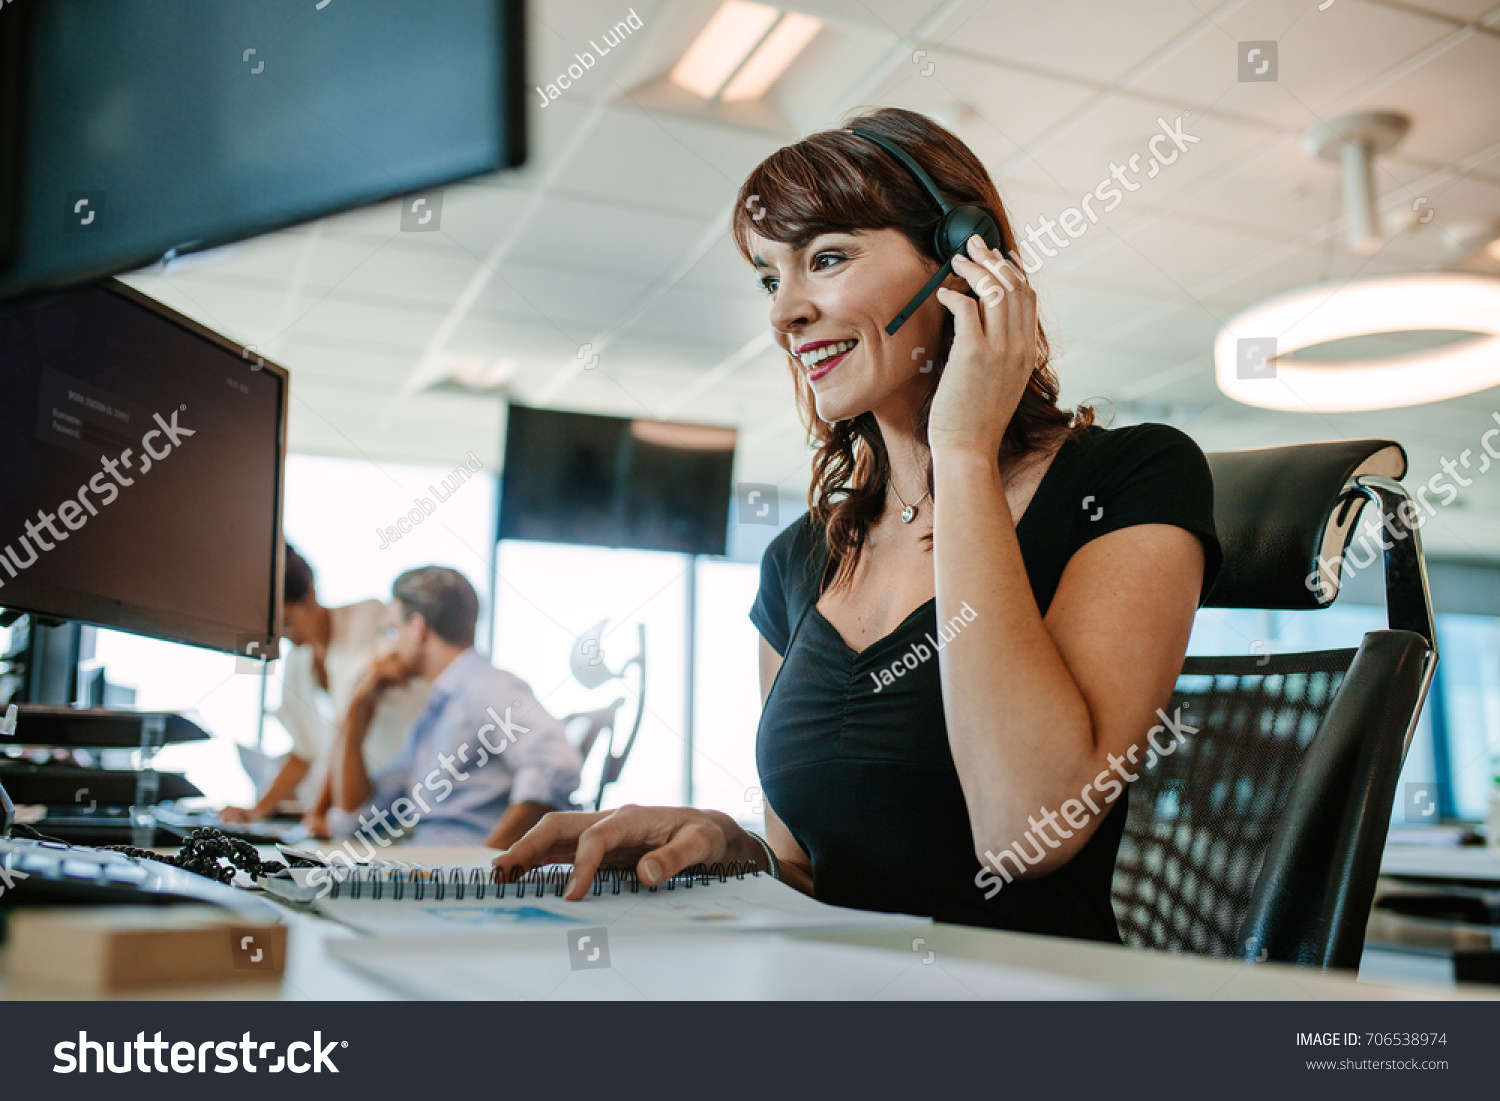 Call center business woman talking on headset. Caucasian female in customer service position talking on the phone. #706538974